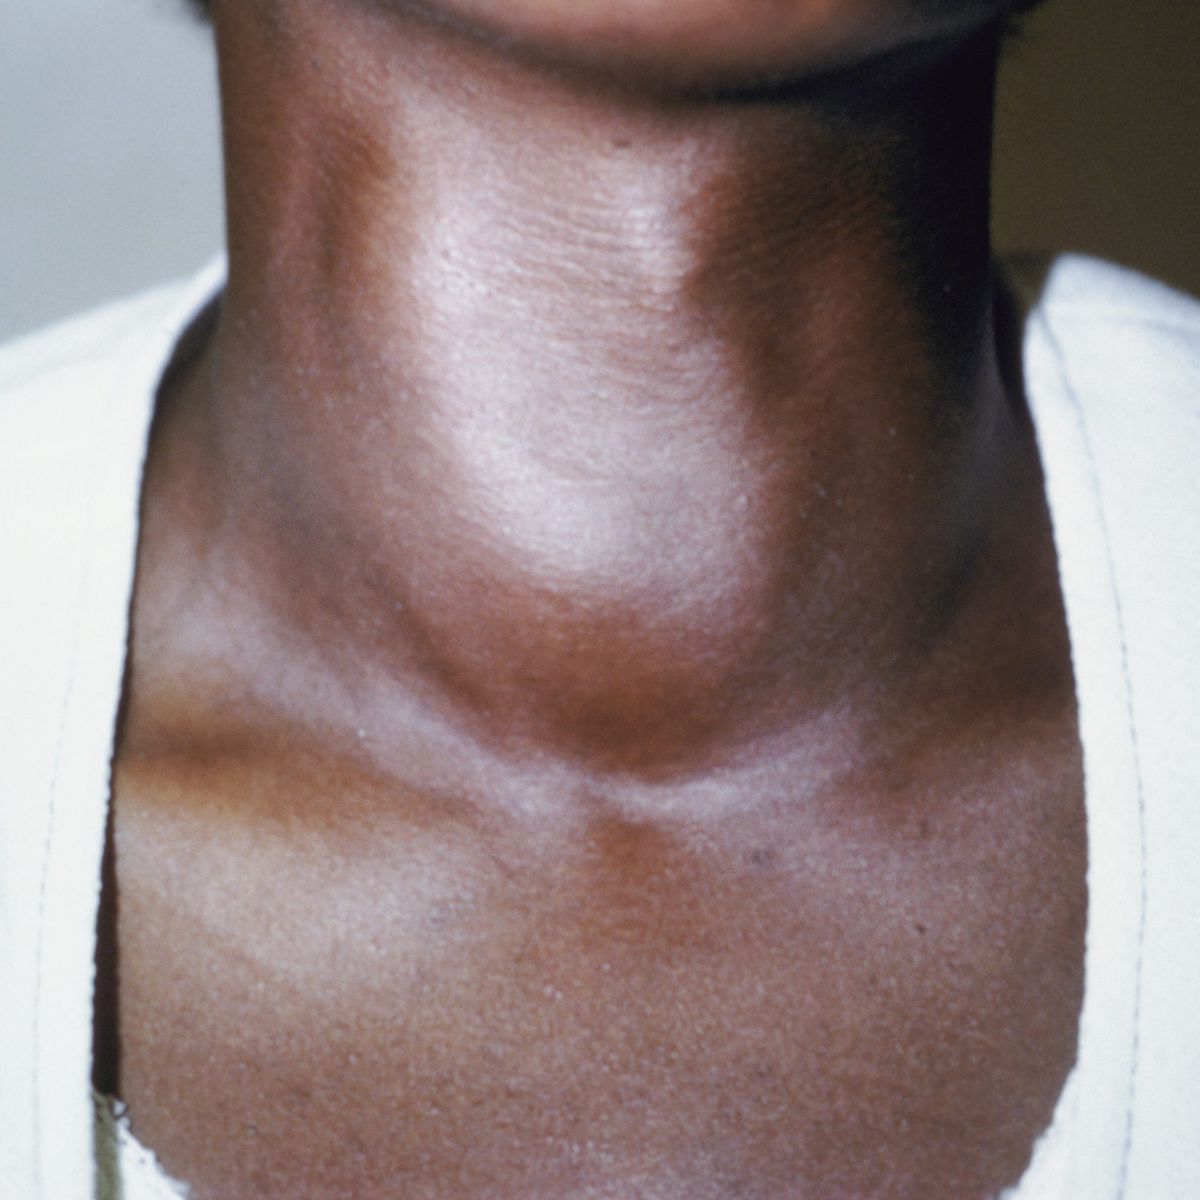 Iodine deficiency can cause a goiter